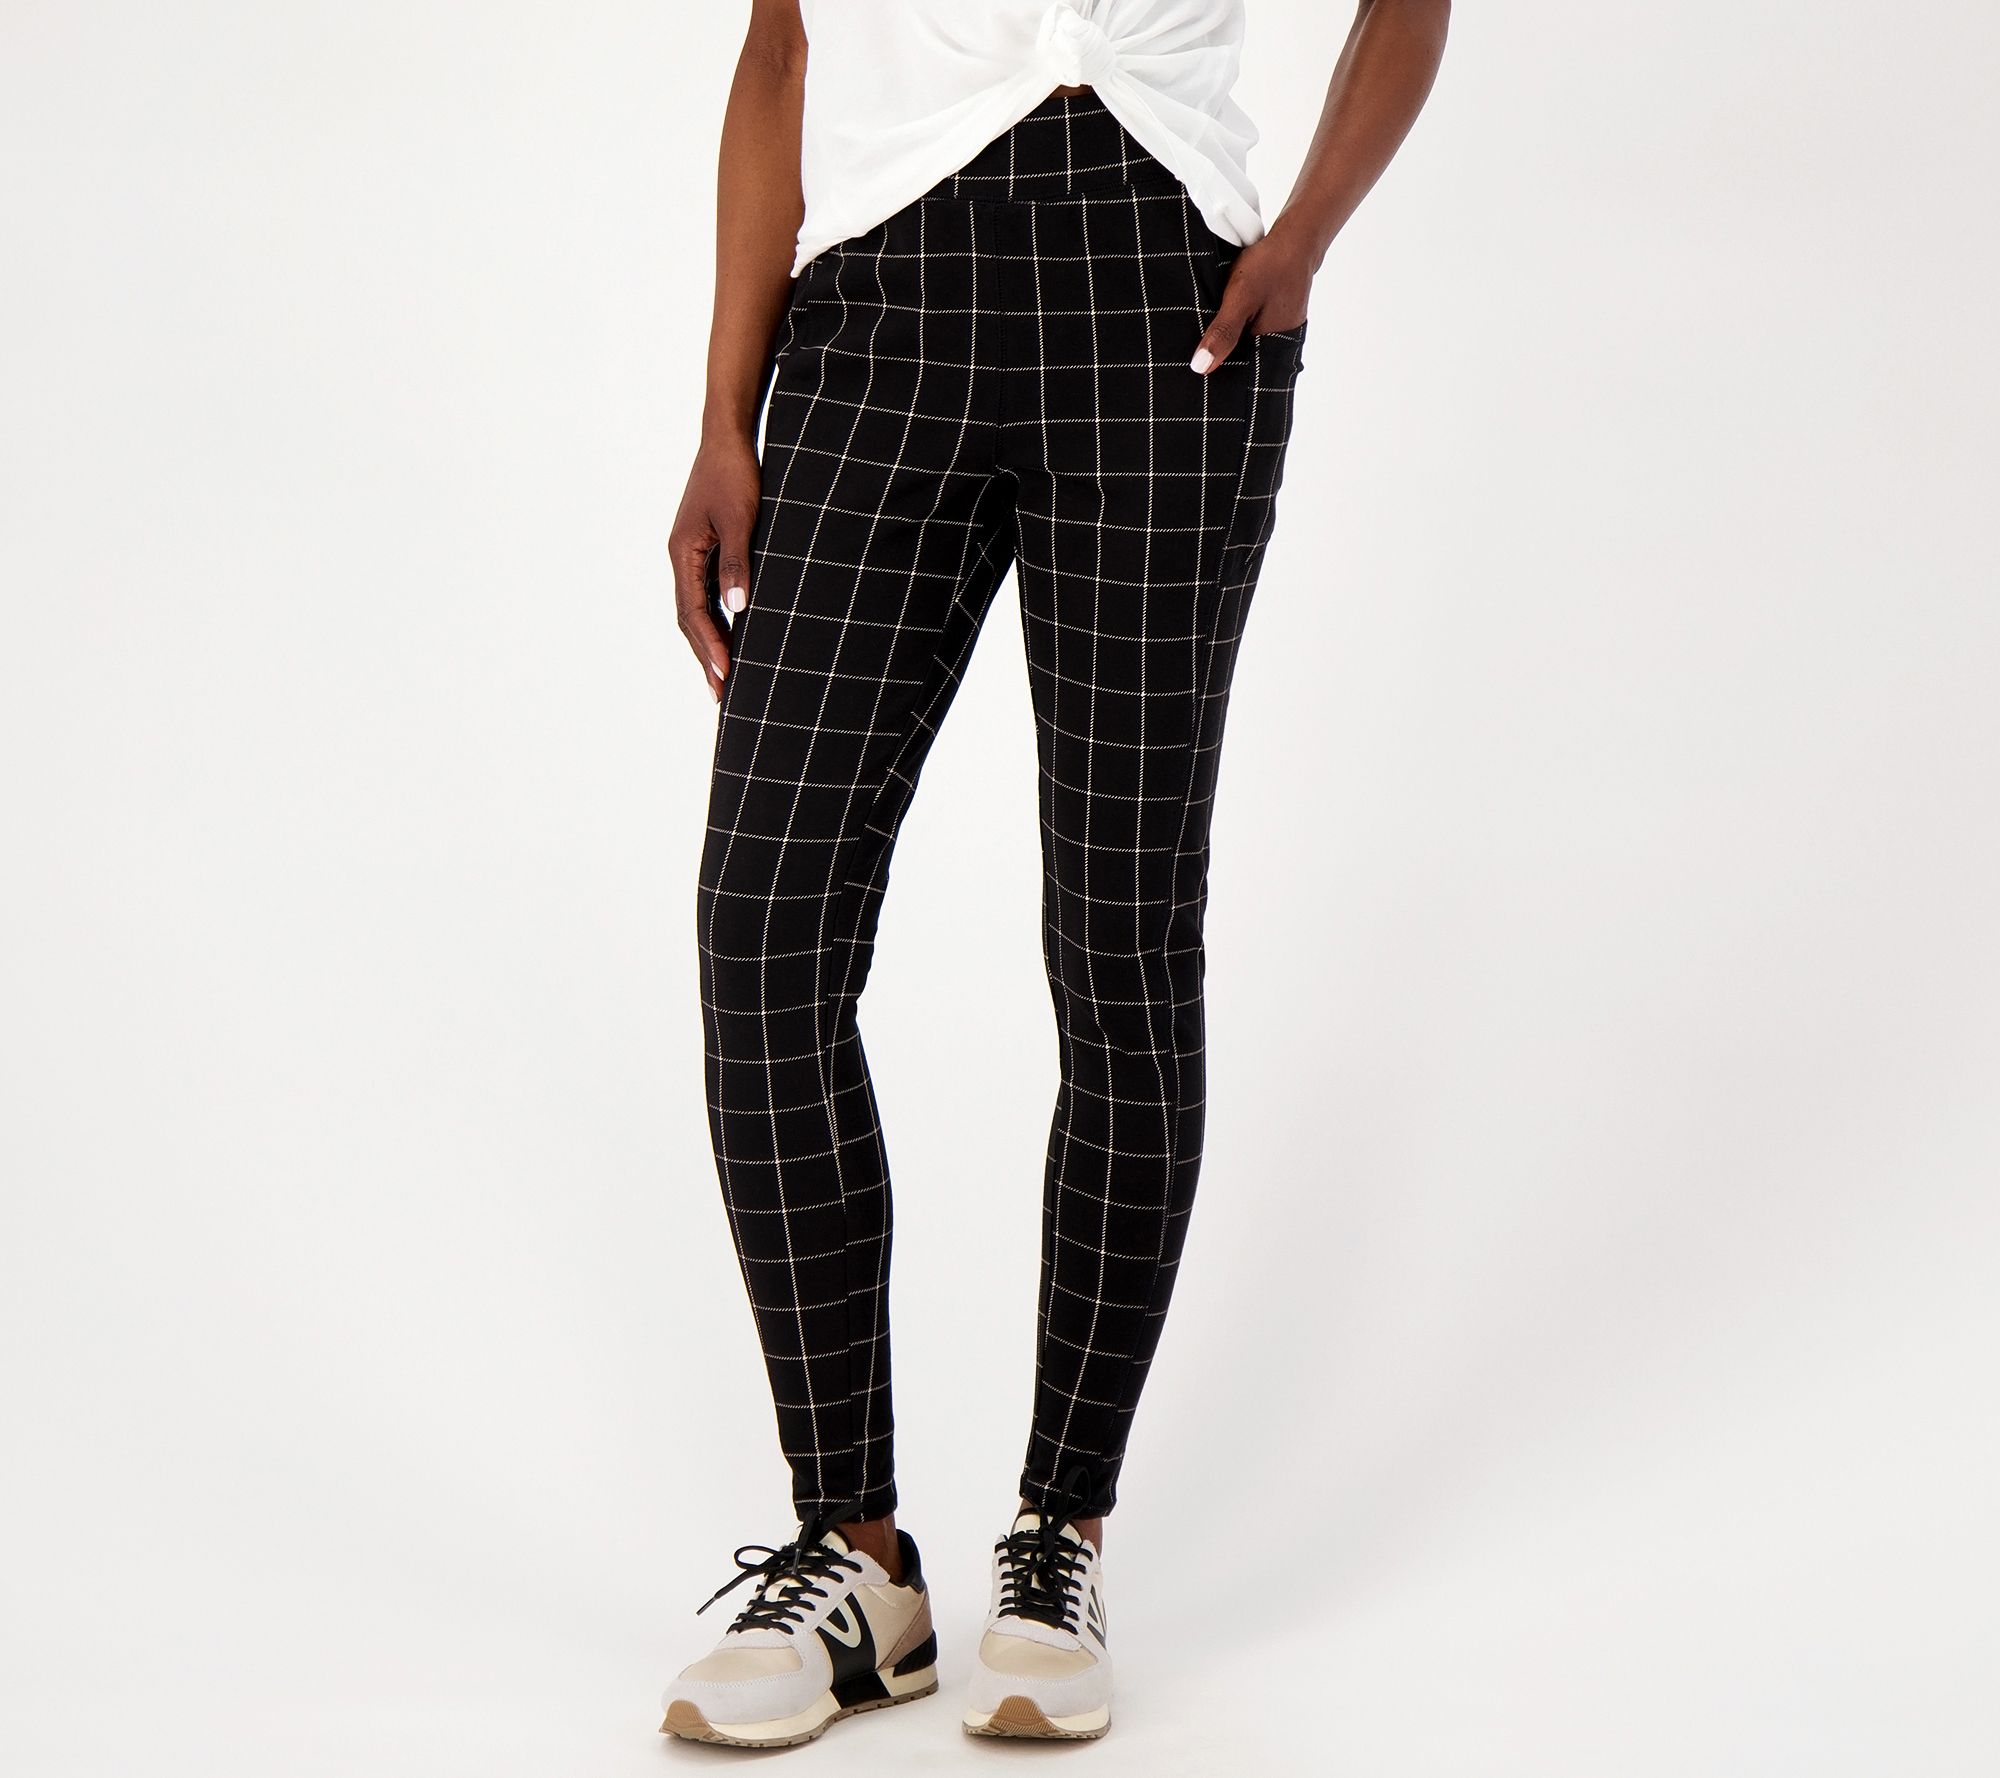 Denim & Co. Active Printed Duo Stretch Cropped Leggings